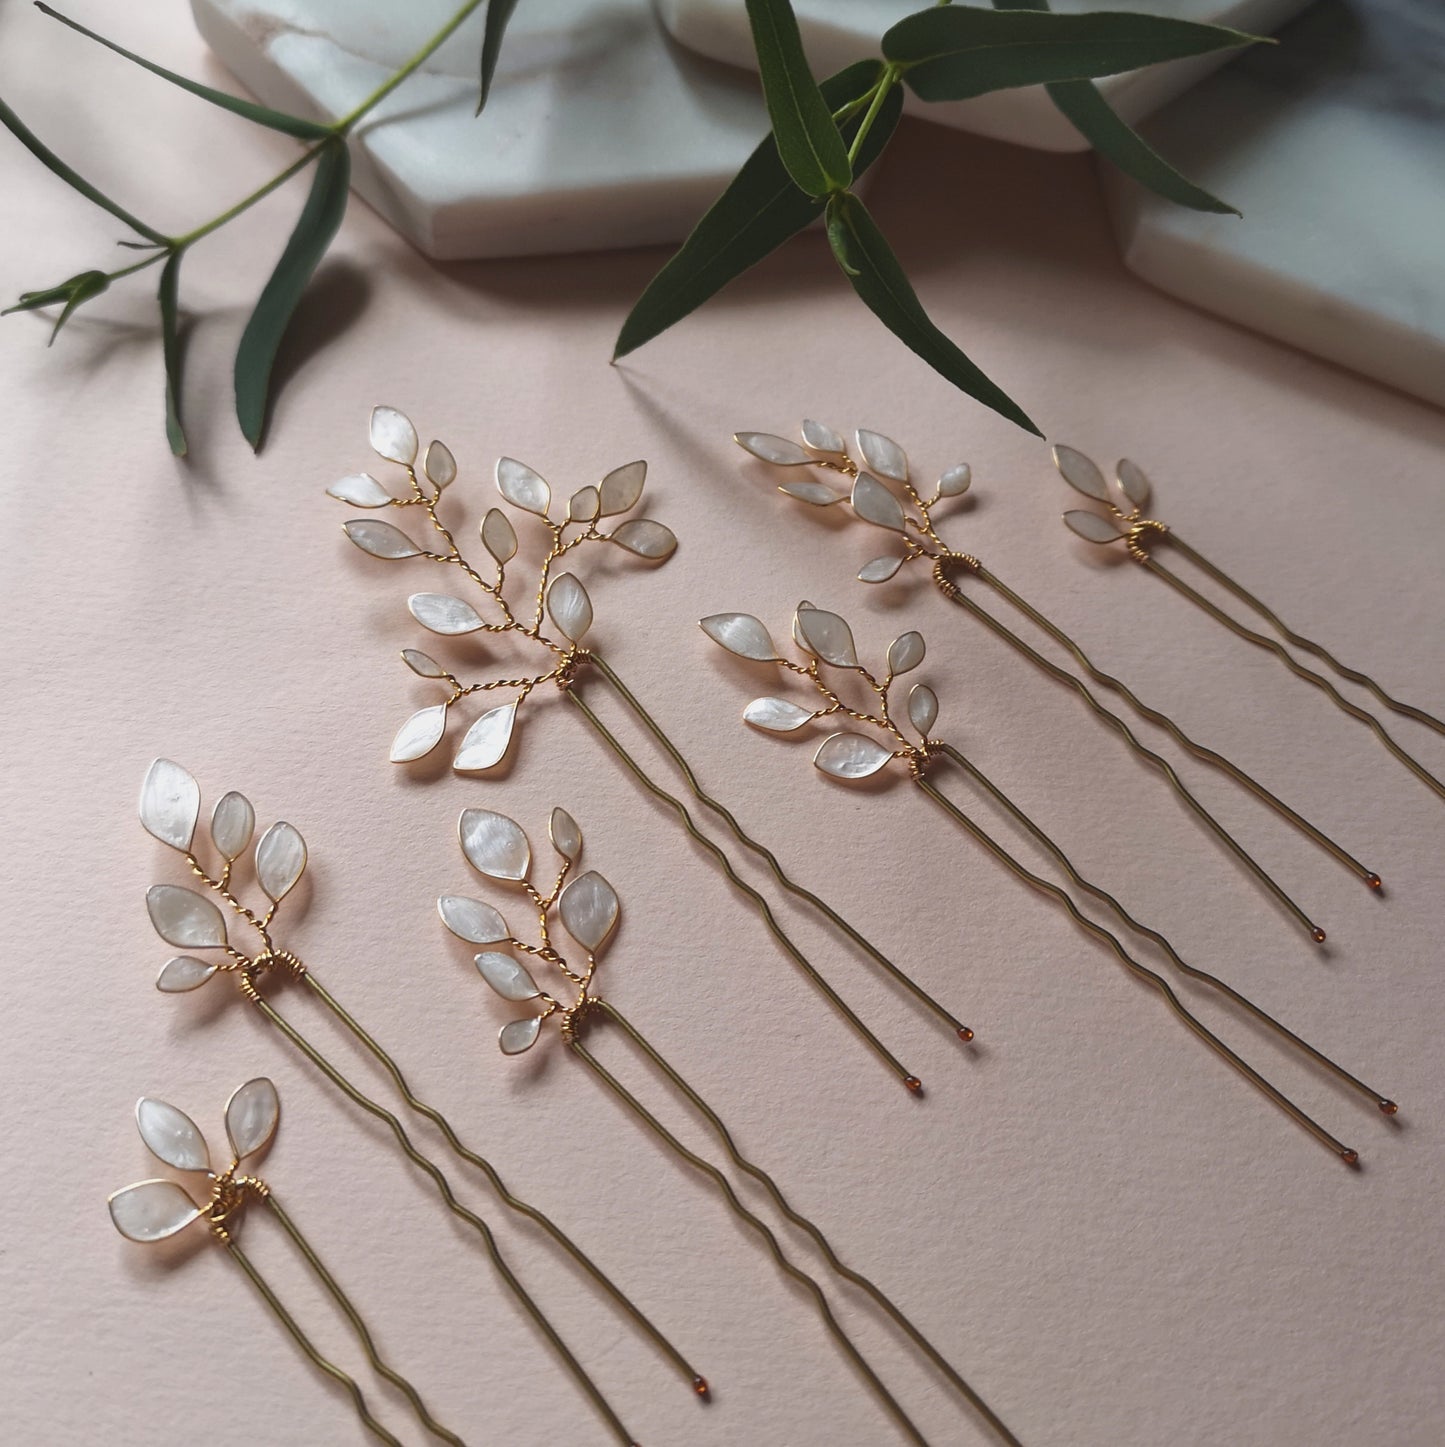 Enchanted Glass Hairpins Set of 7 in Gold